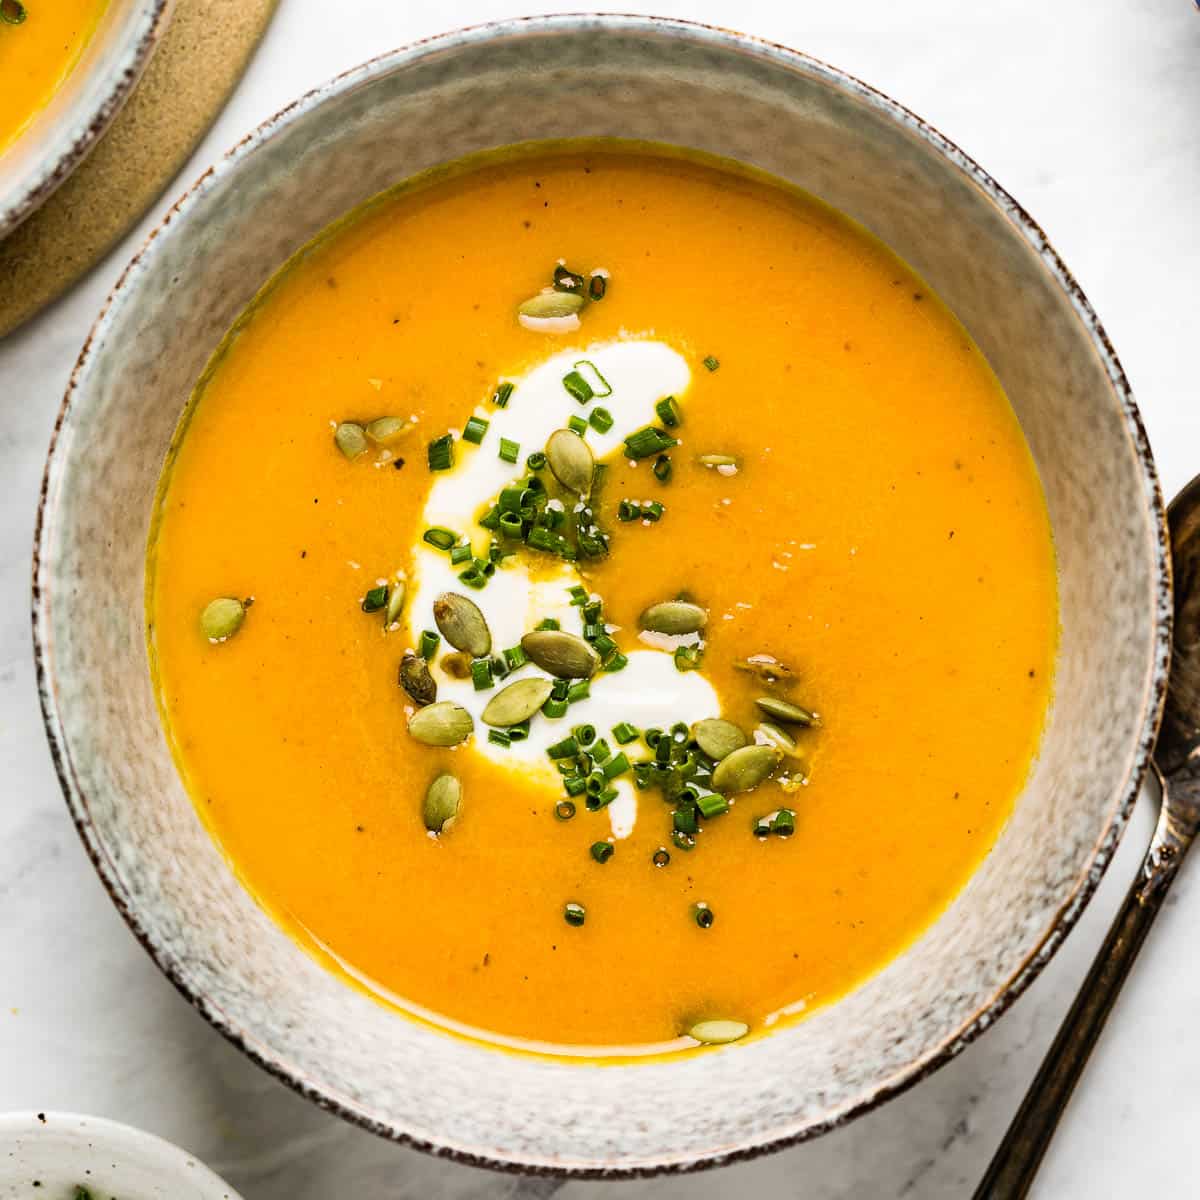 https://foolproofliving.com/wp-content/uploads/2020/11/Carrot-Soup-with-Ginger-Recipe.jpg